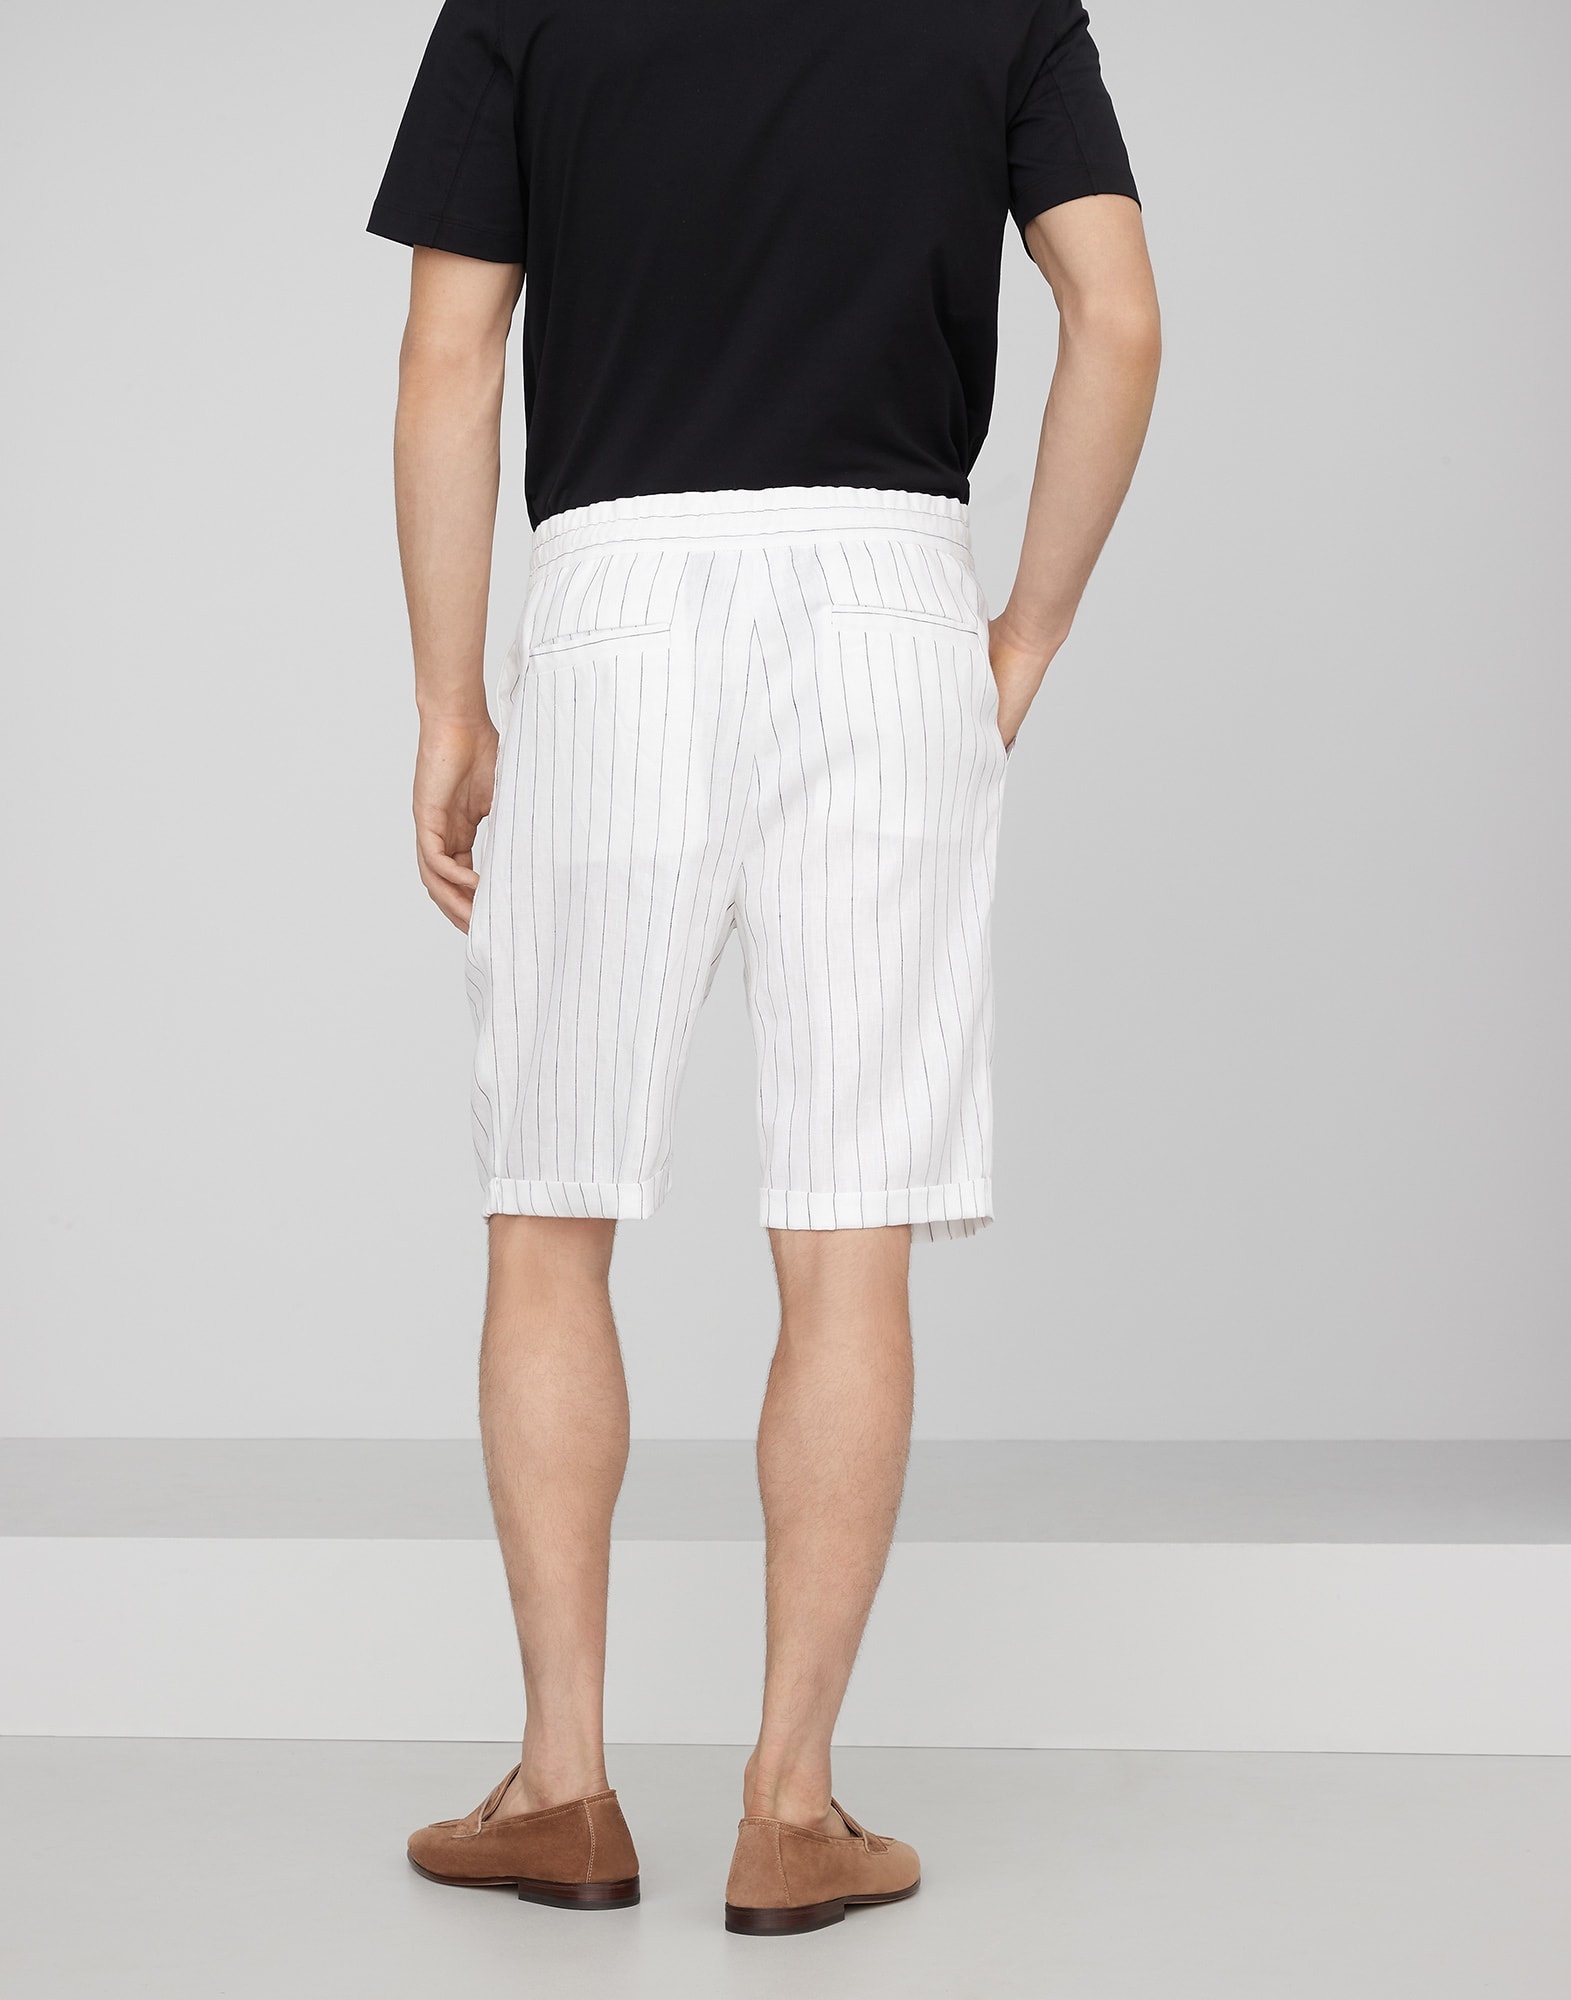 Linen chalk stripe Bermuda shorts with drawstring and double pleats - 2